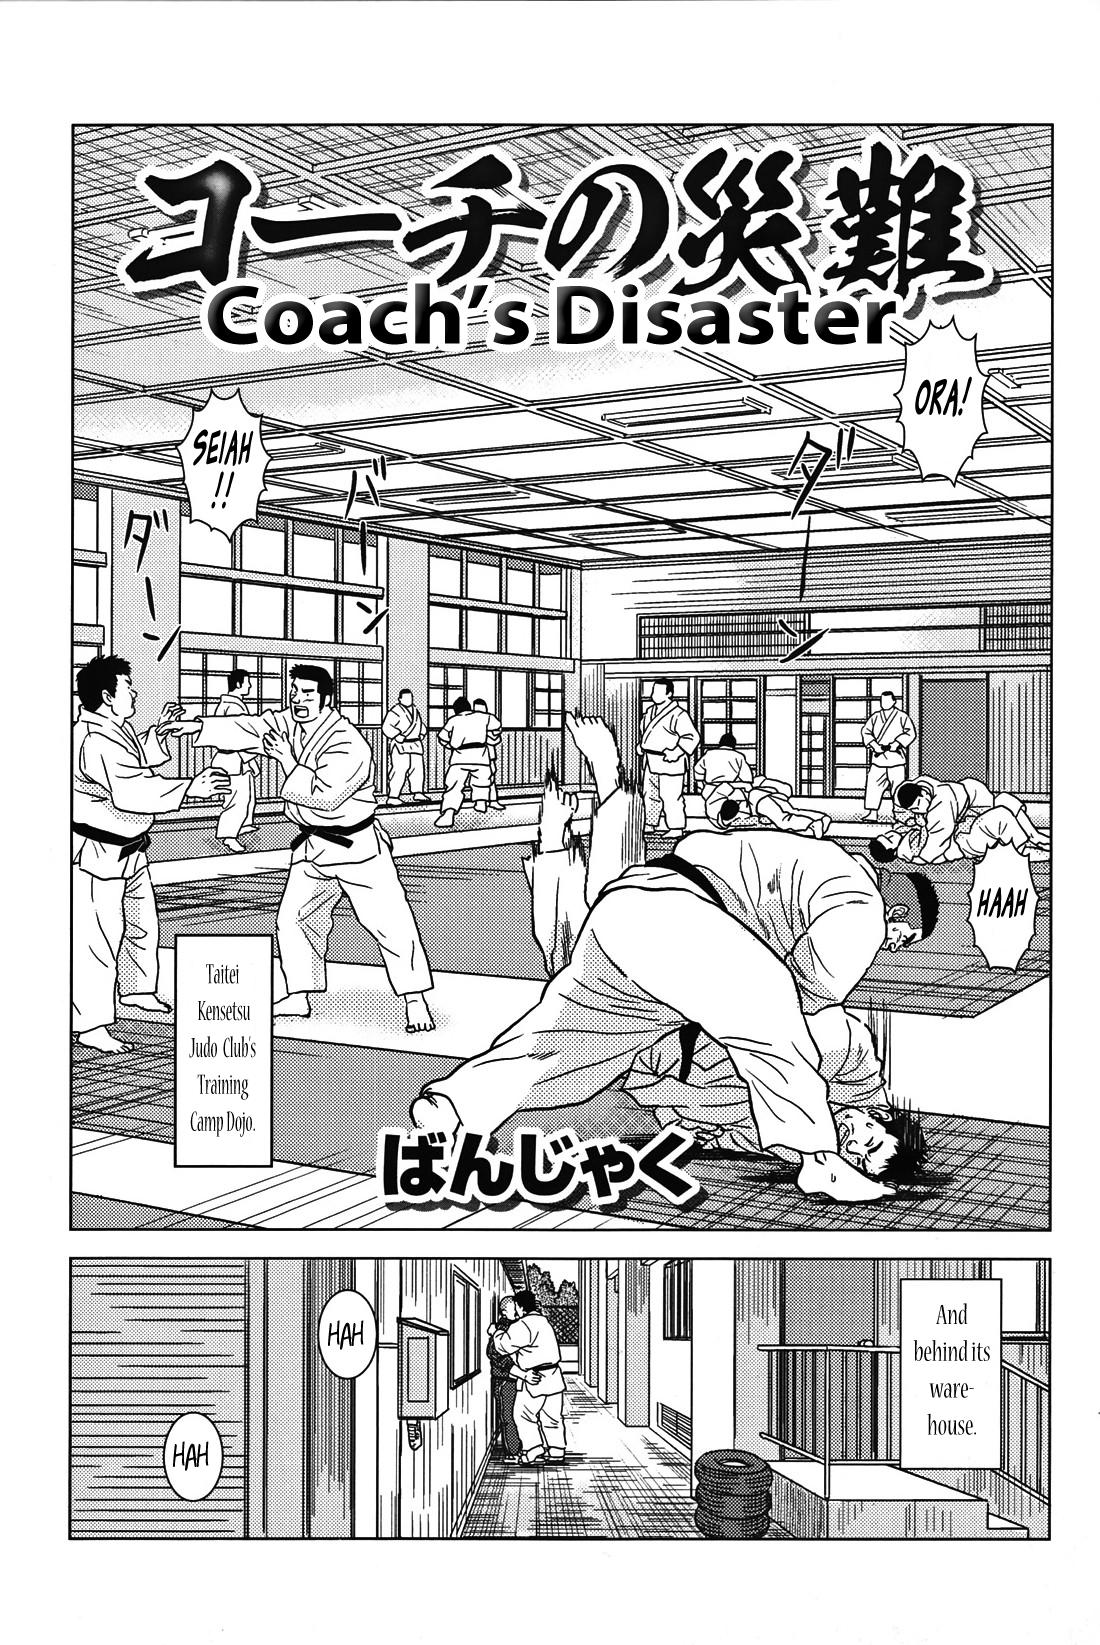 Coach's Disaster 0